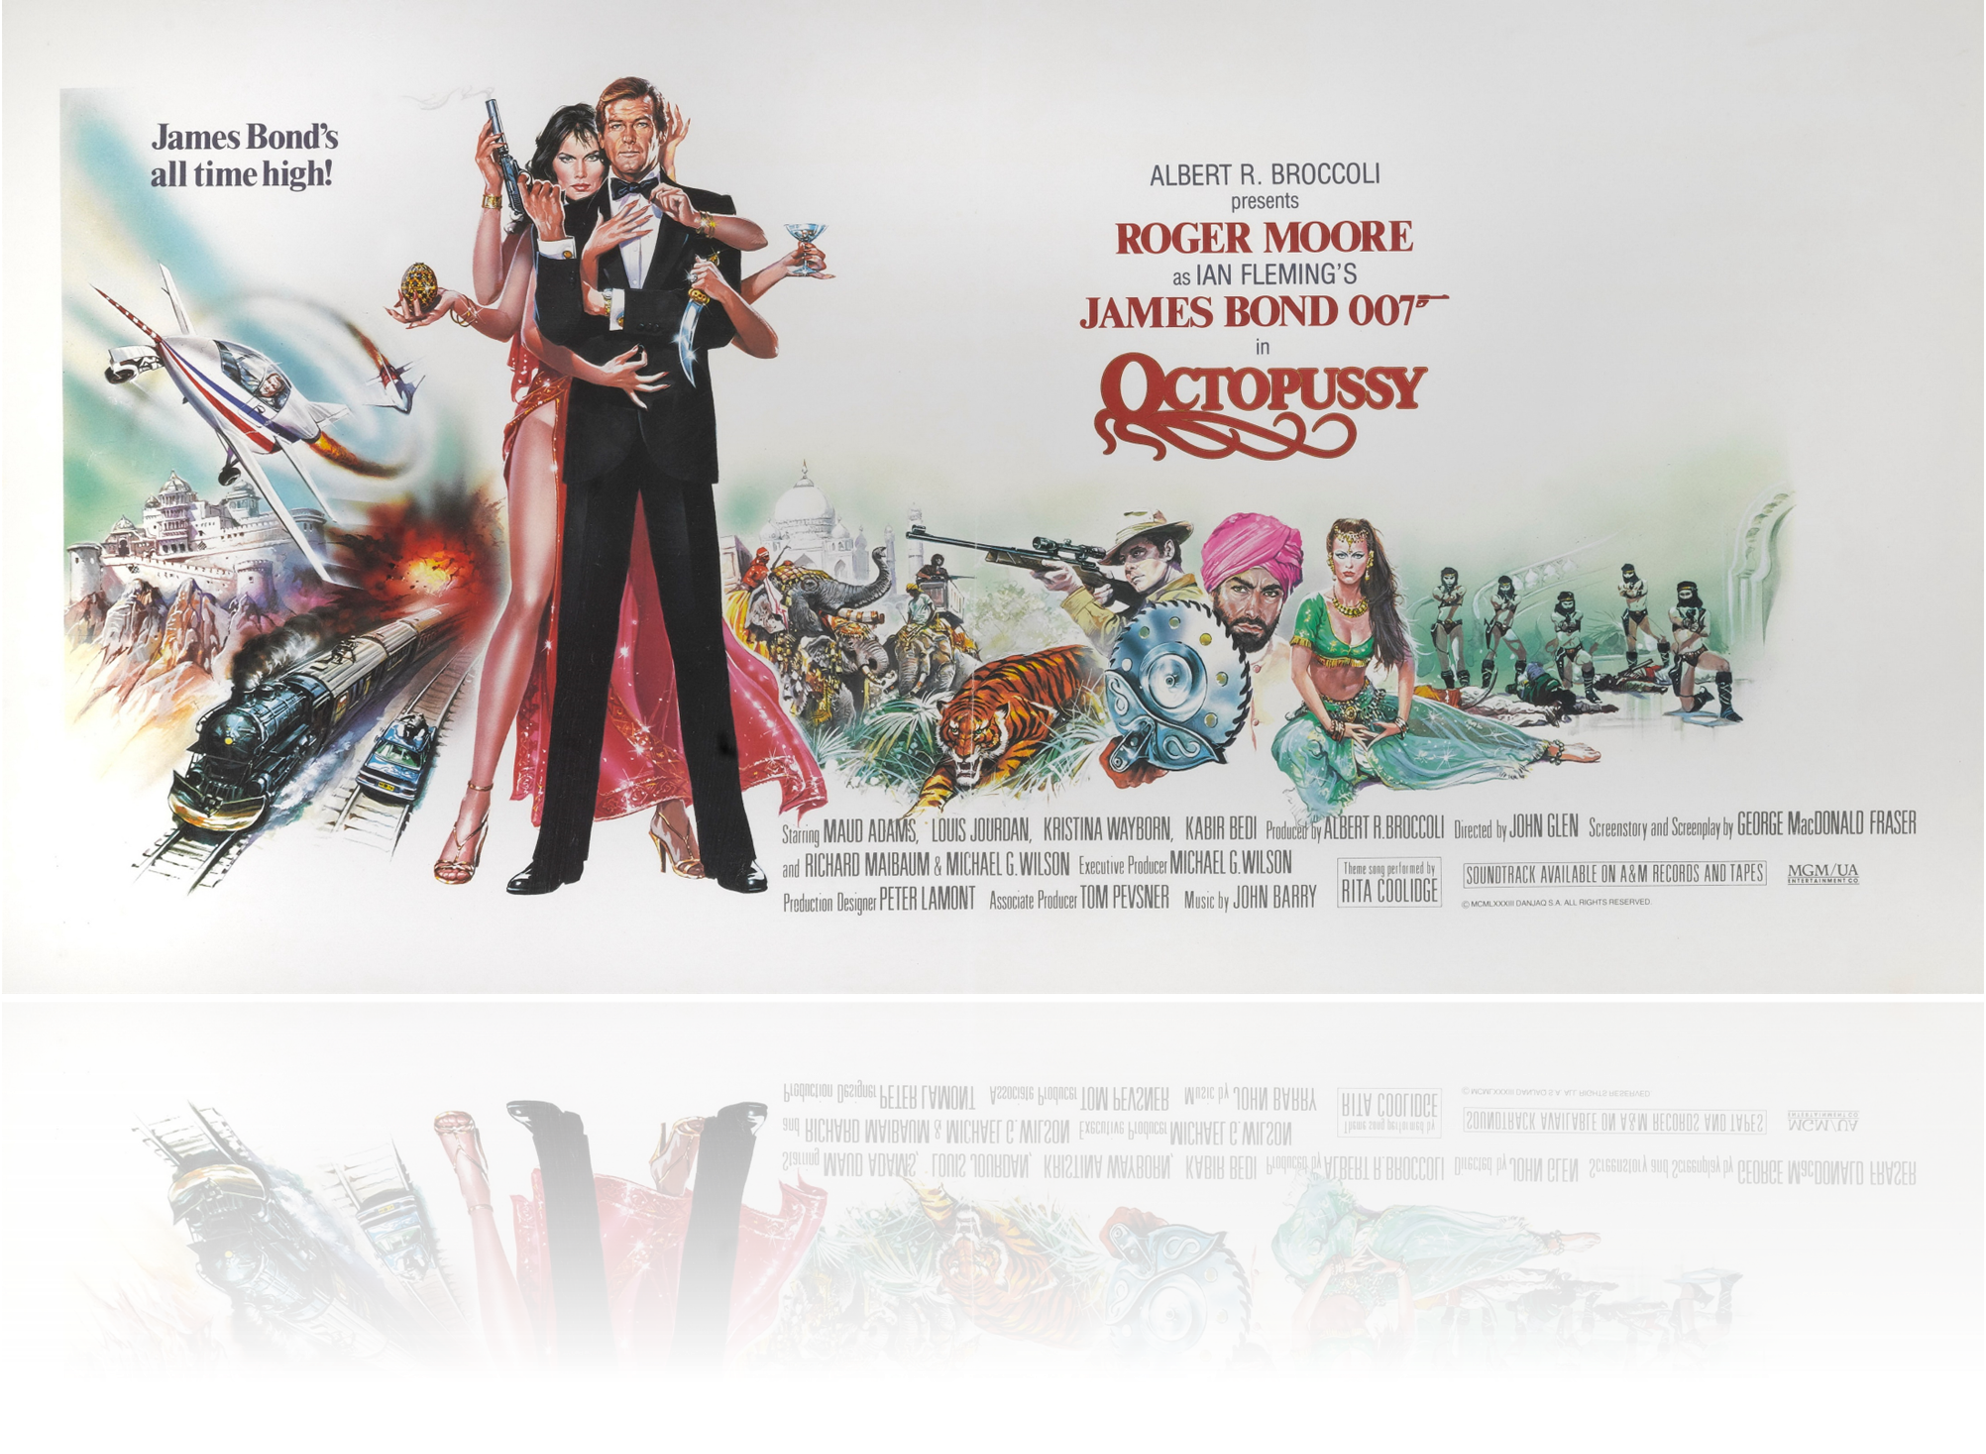 An original movie poster for the James Bond film Octopussy with artwork by Daniel Goozee